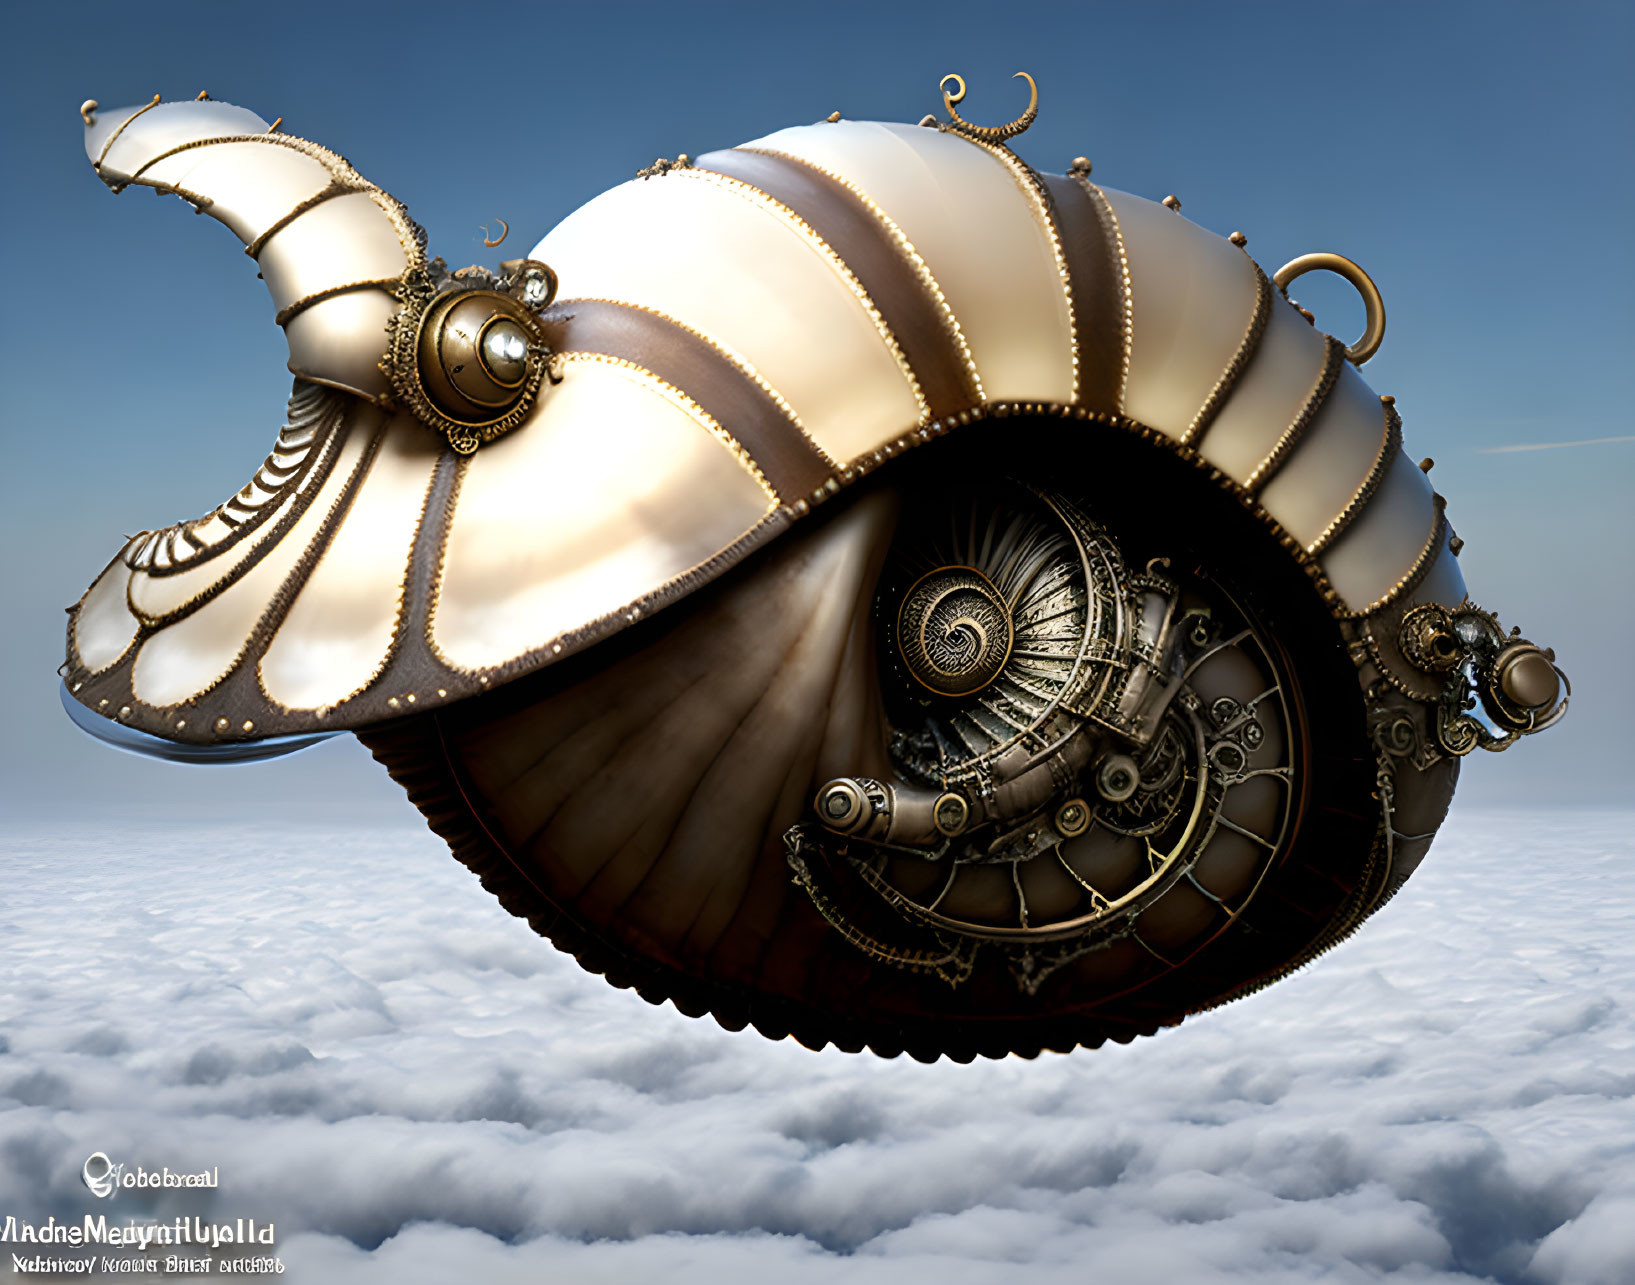 Steampunk-style snail with metallic elements and gears above clouds